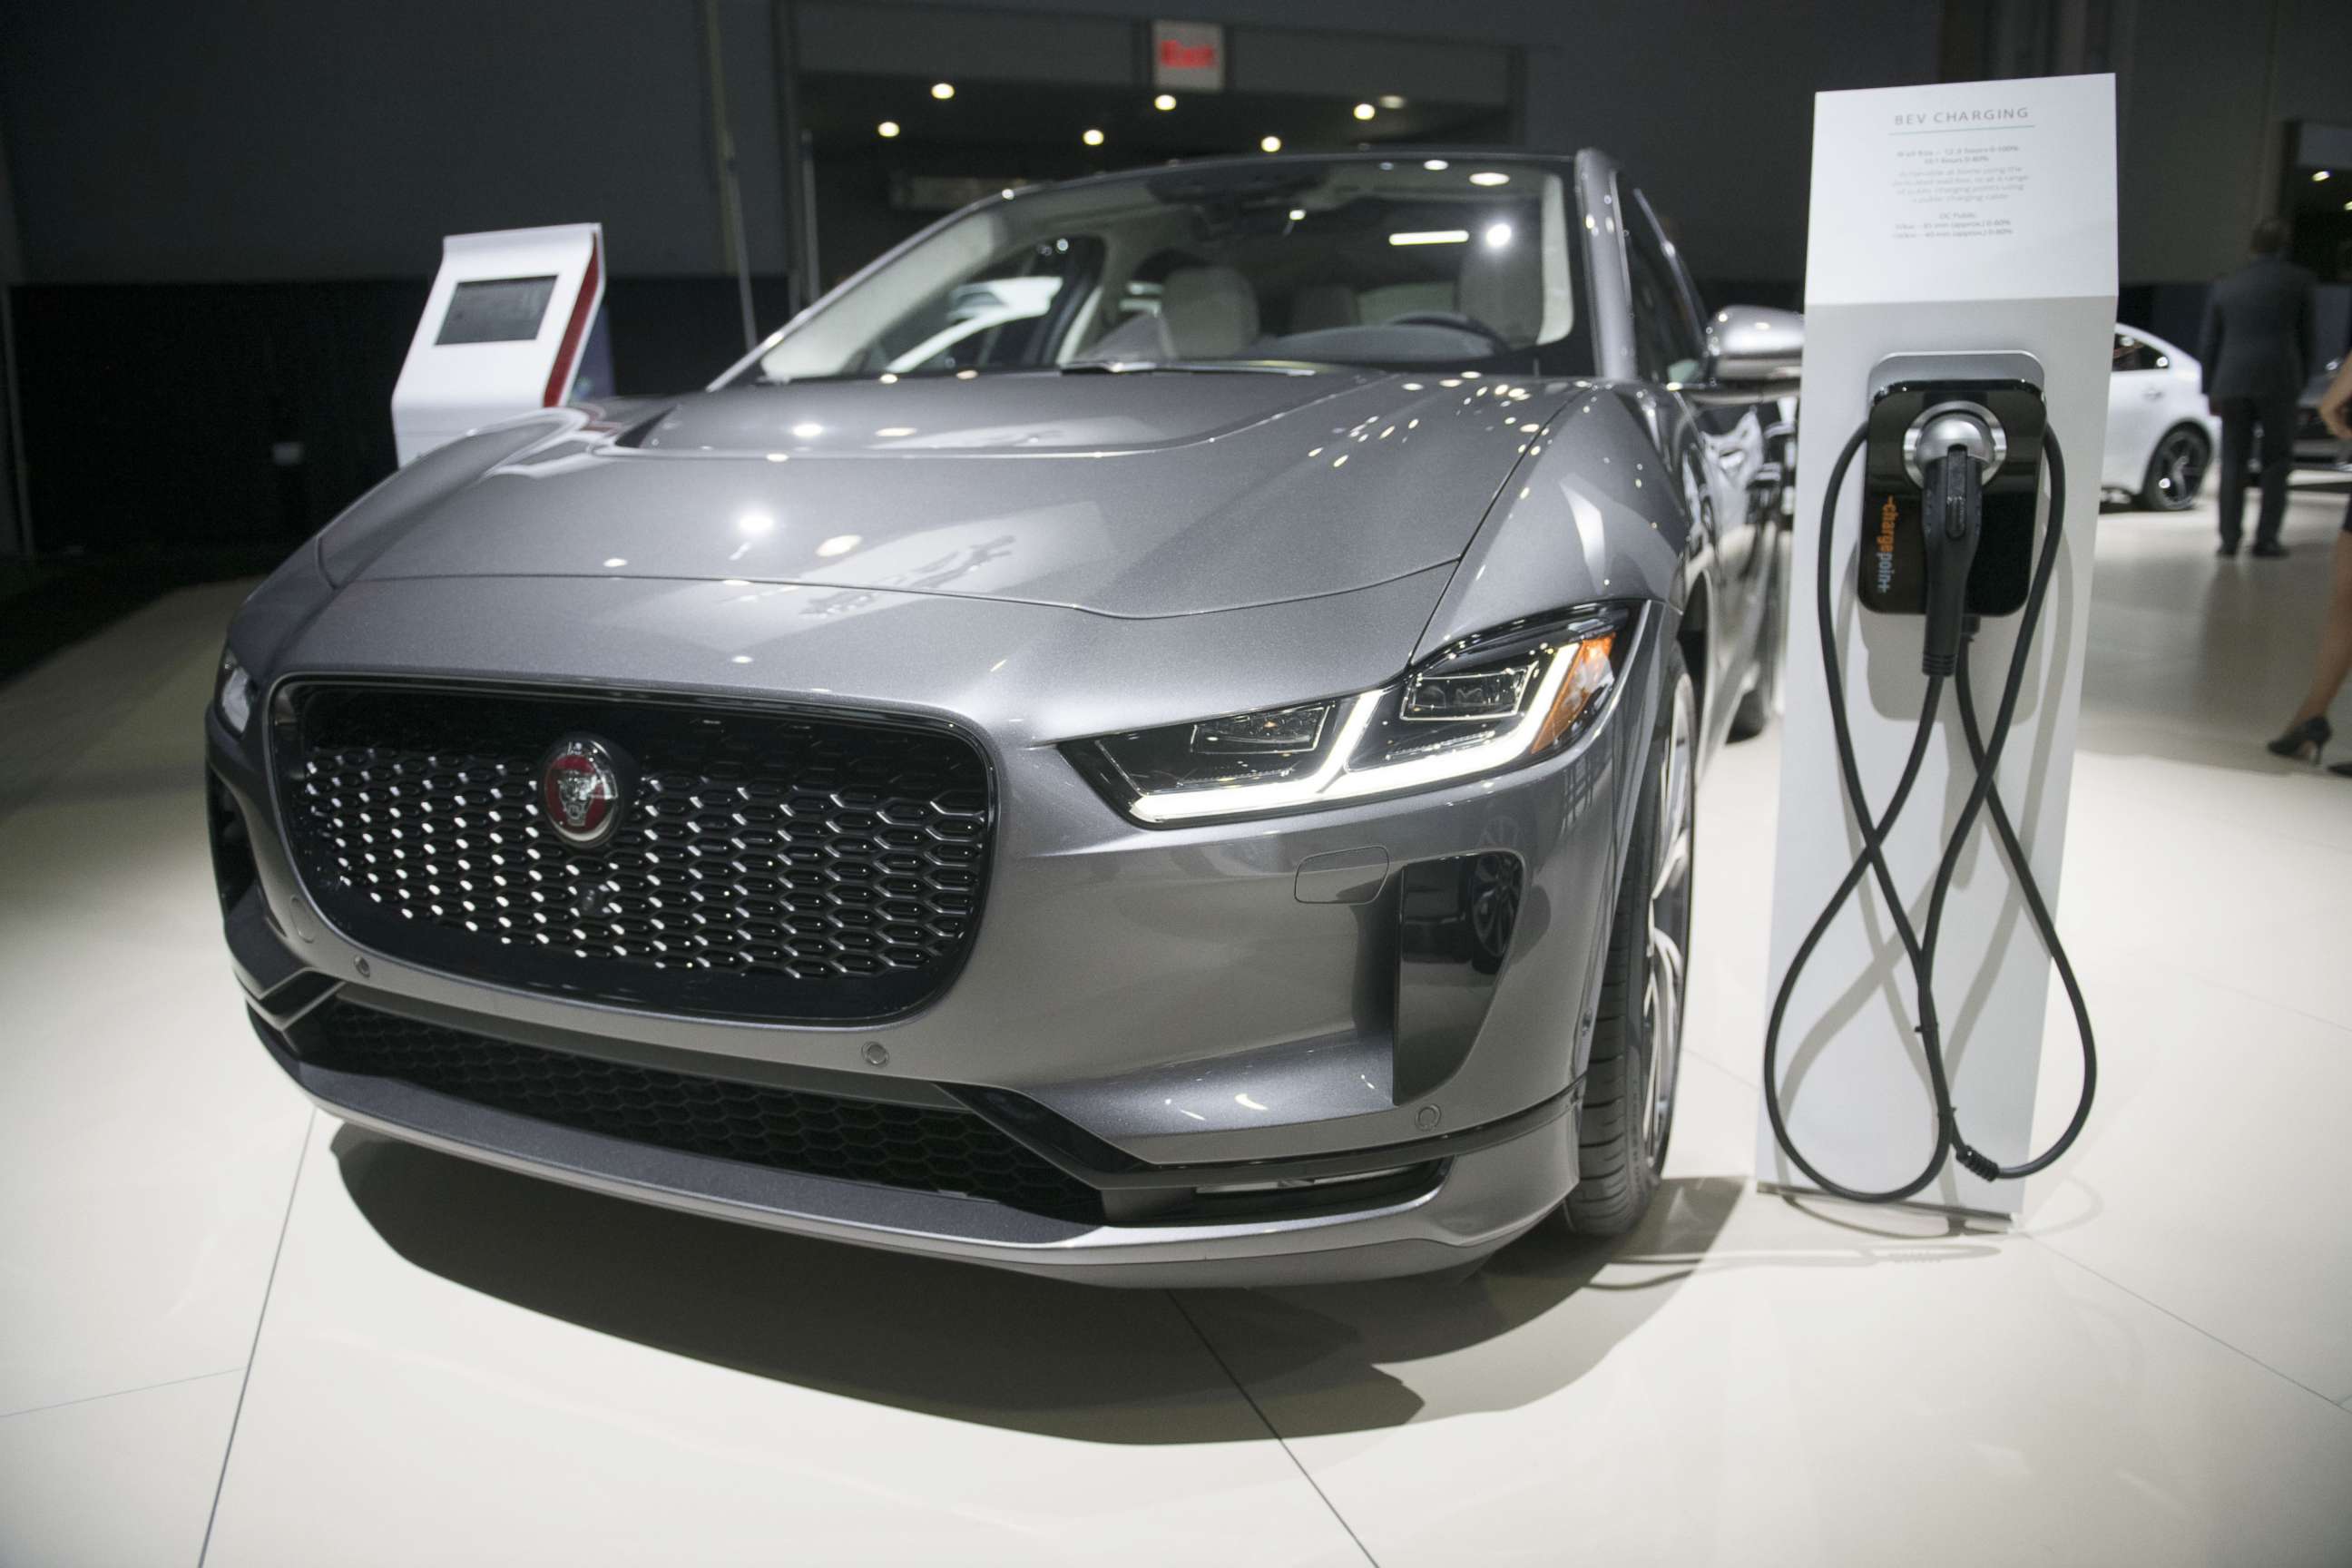 PHOTO: The Jaguar Land Rover Automotive Plc I-Pace electric vehicle is displayed during the 2018 New York International Auto Show in New York, March 29, 2018.